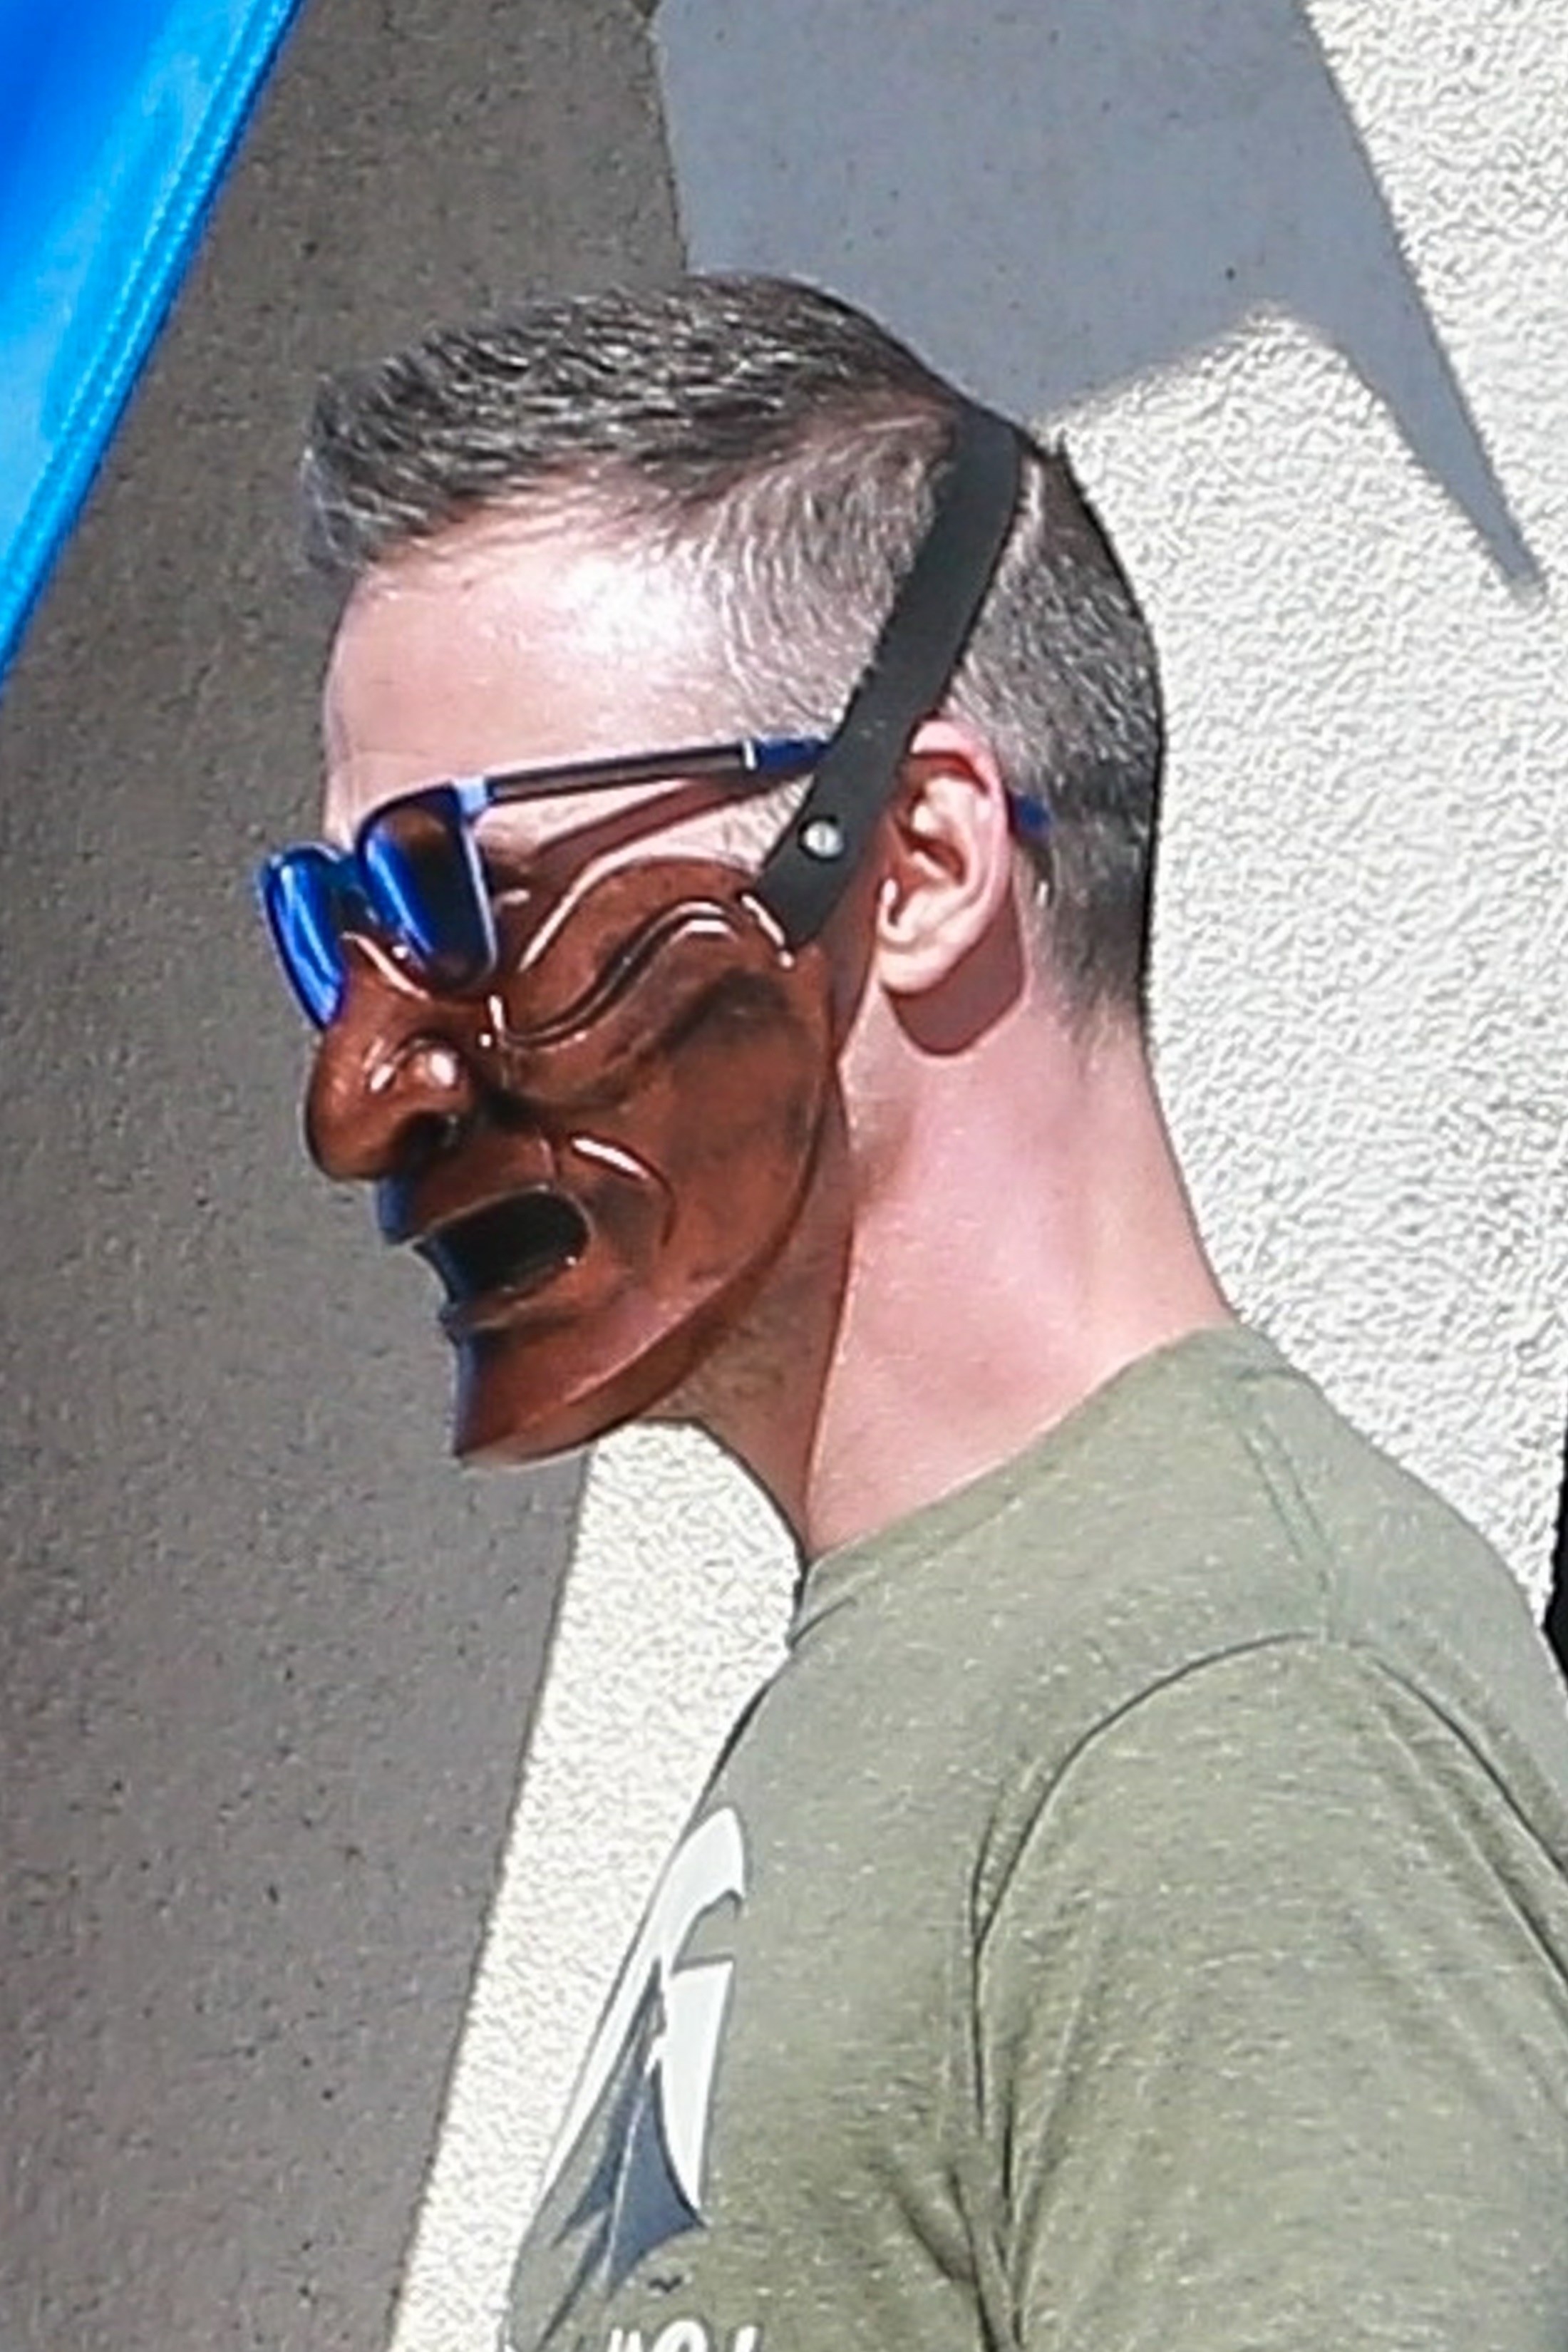 A profile pic of Freddie Prinze Jr. with a mask that looks like half of an iron man costume.